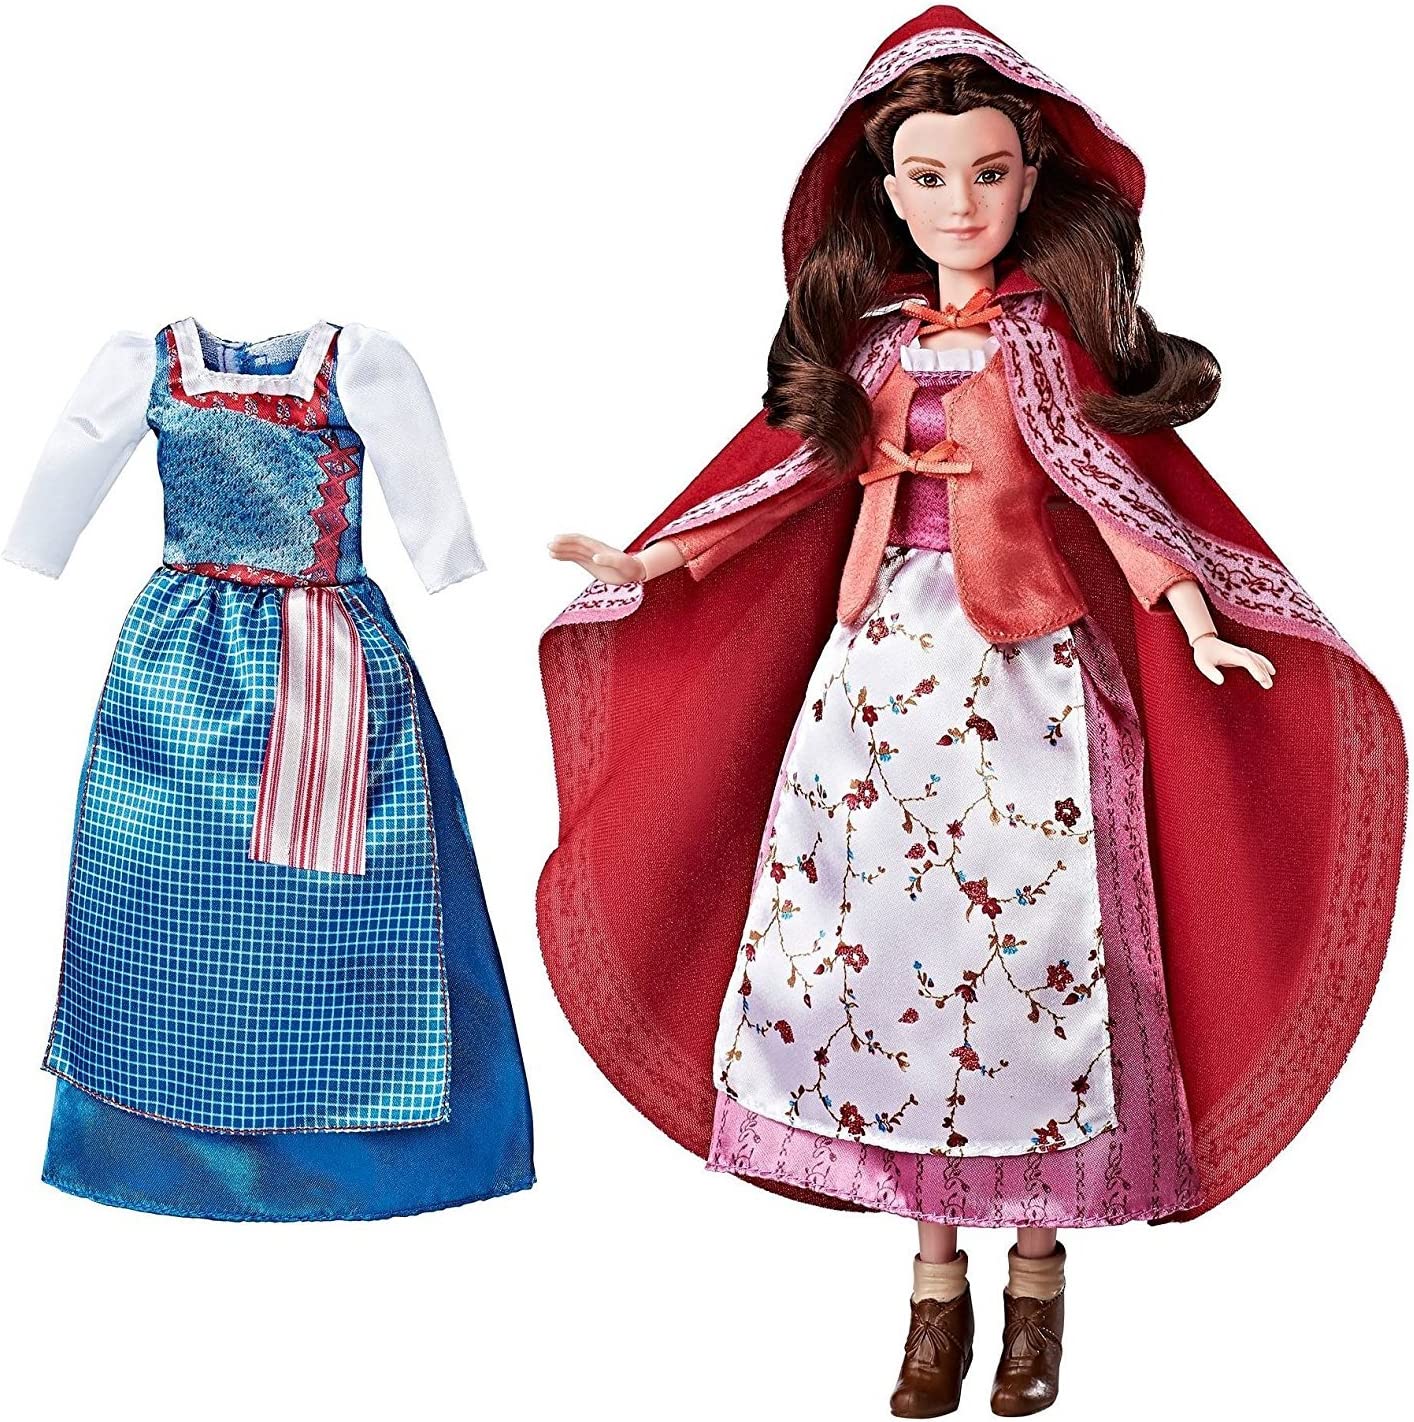 Disney Beauty and The Beast Exclusive Fashion Collection Belle Doll Playset - image 1 of 2